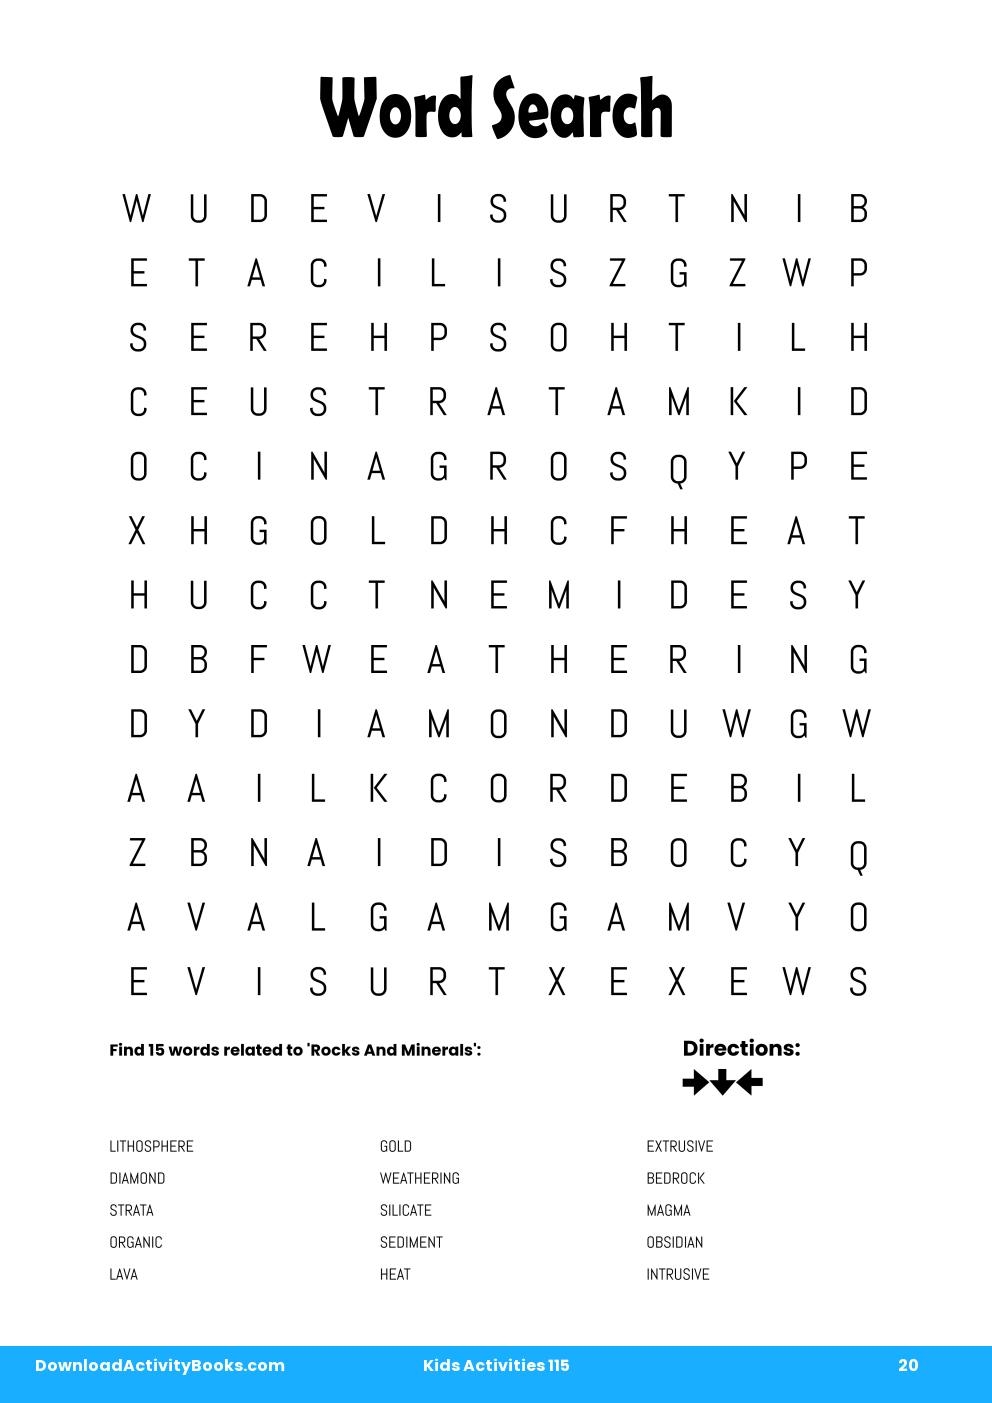 Word Search in Kids Activities 115